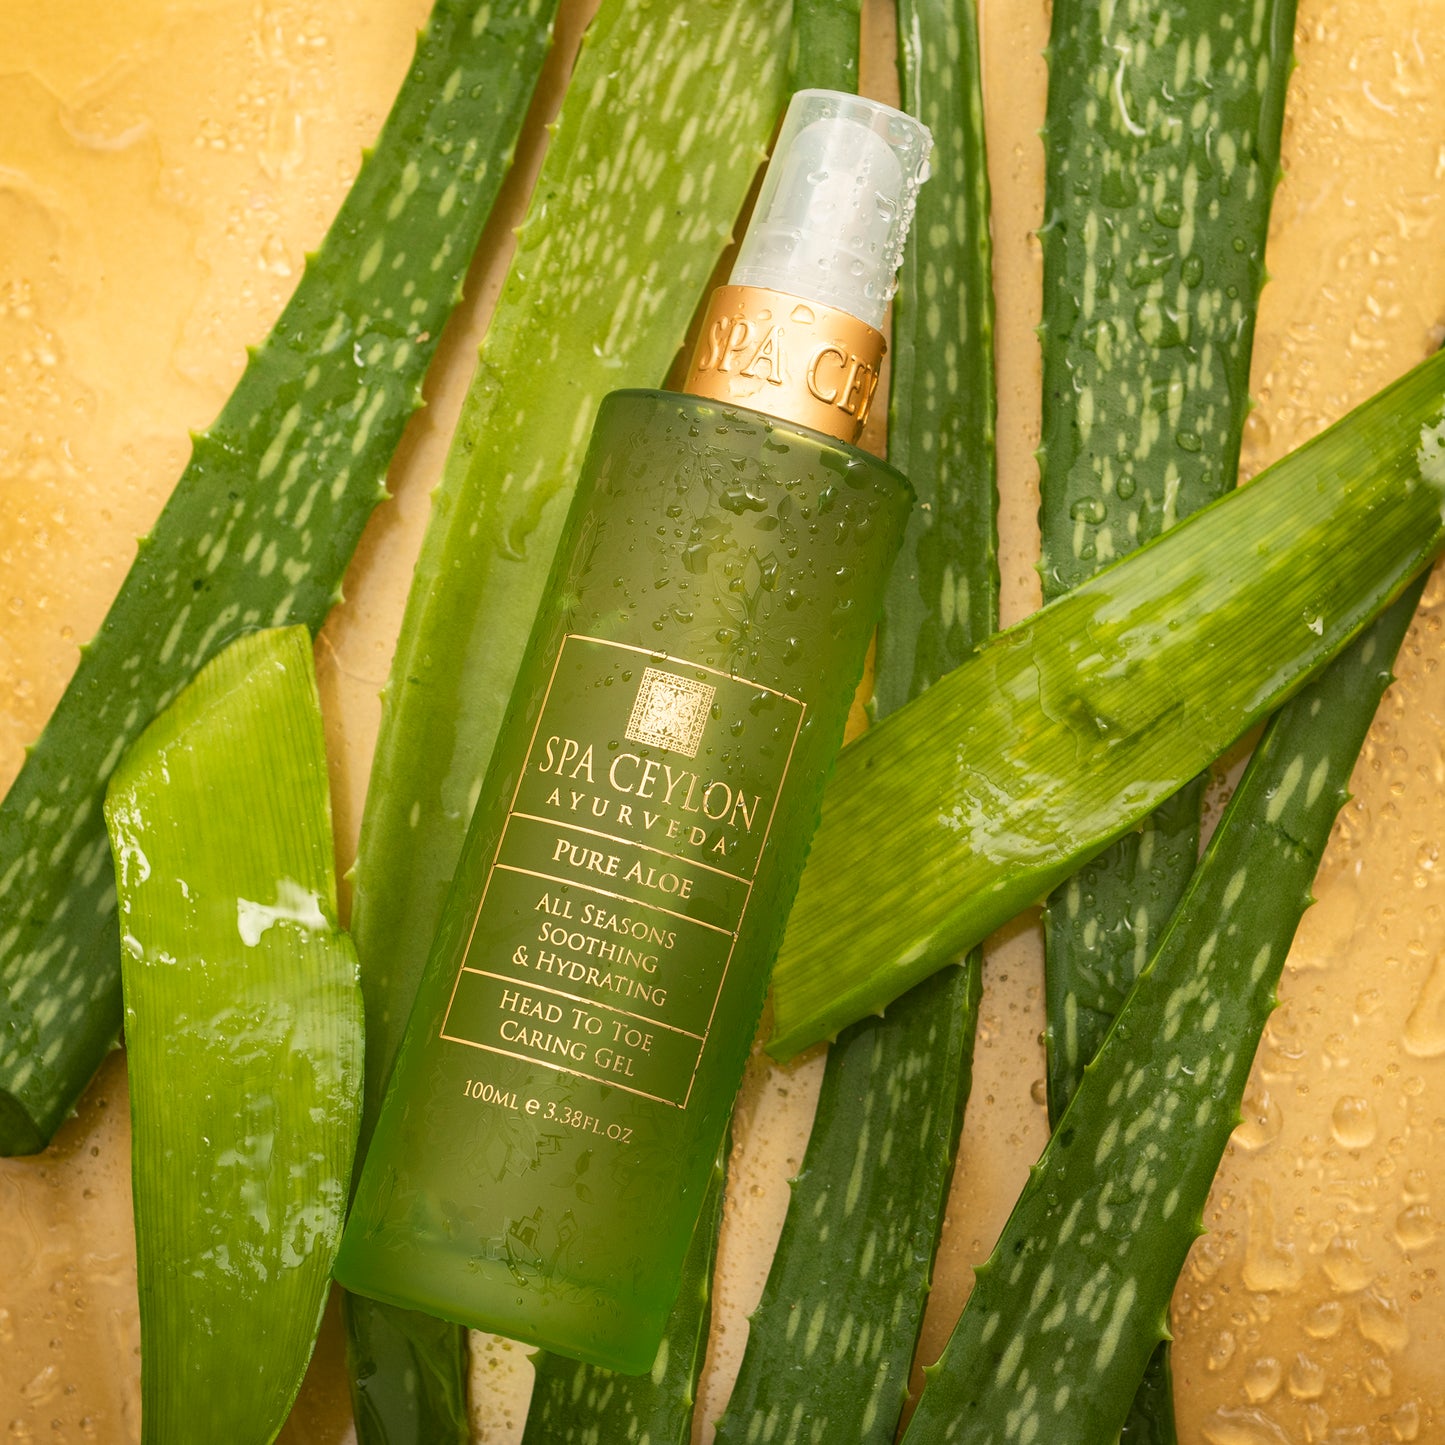 PURE ALOE - ALL SEASONS - SOOTHING & HYDRATING HEAD TO TOE CARING GEL